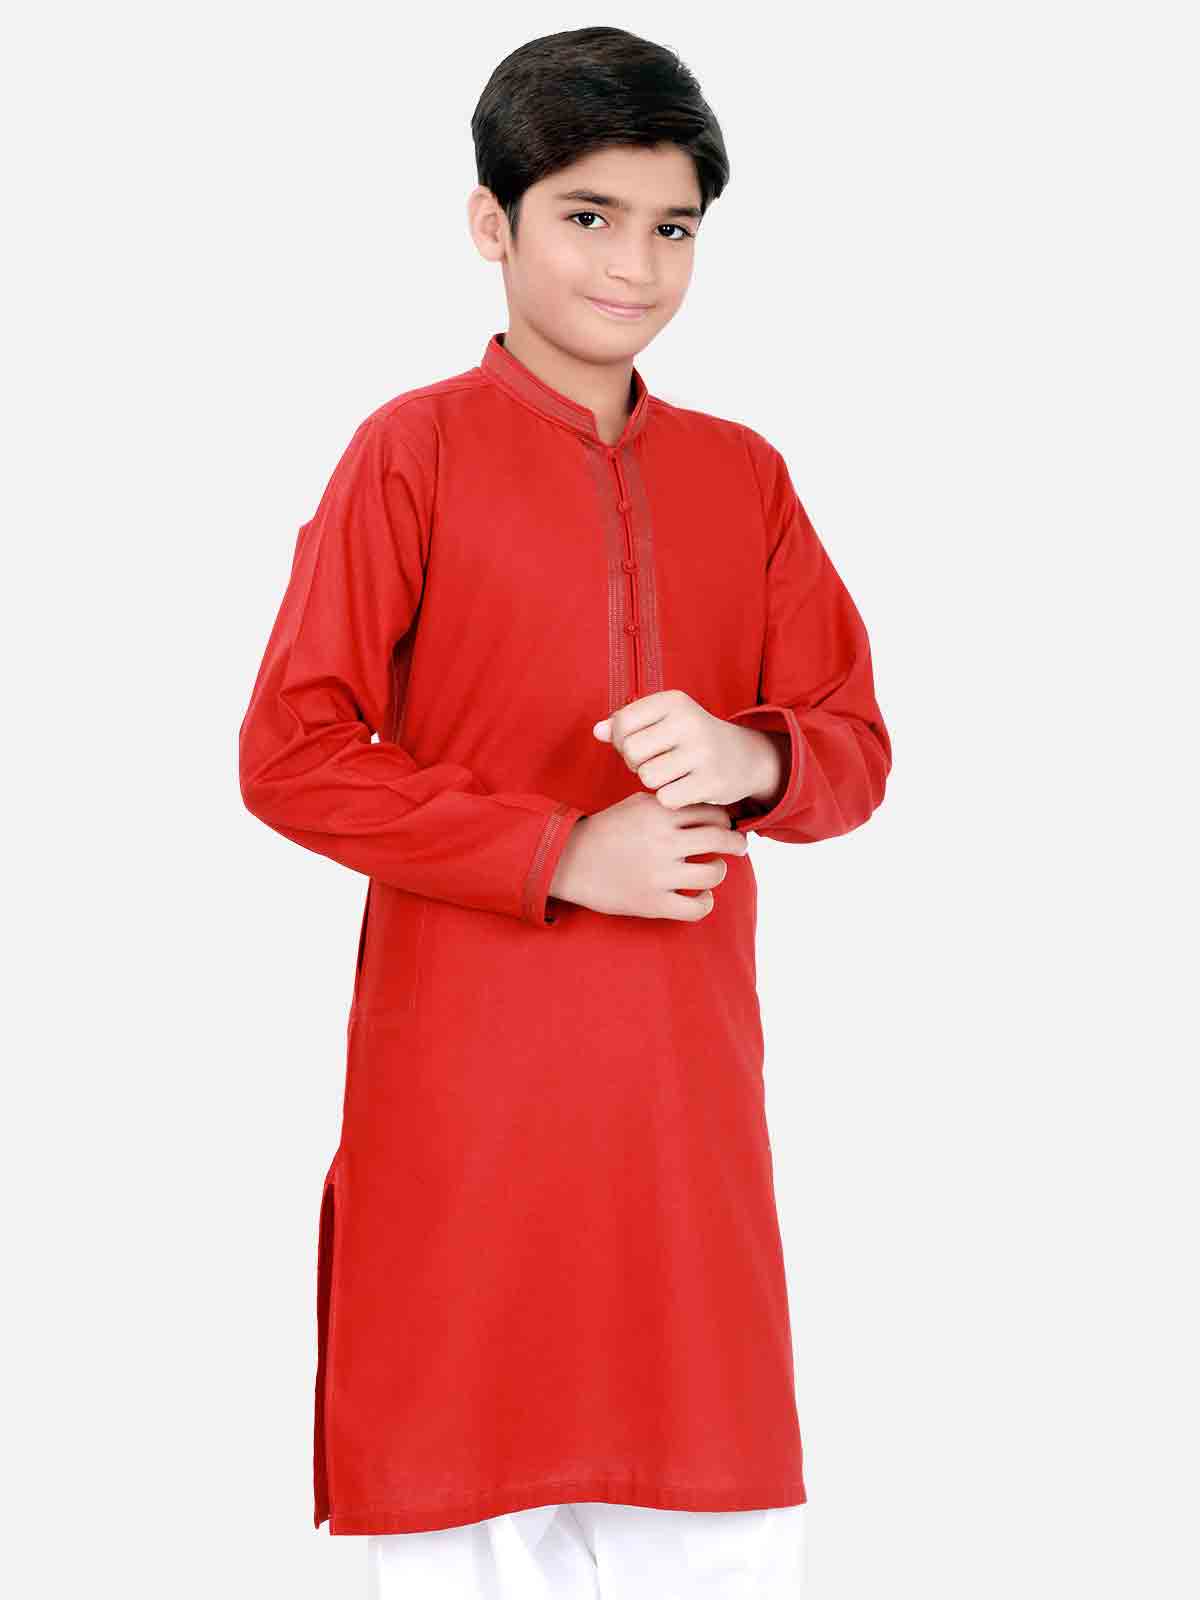 Red kurta with white shalwar latest eid dresses for little boys in Pakistan 2017